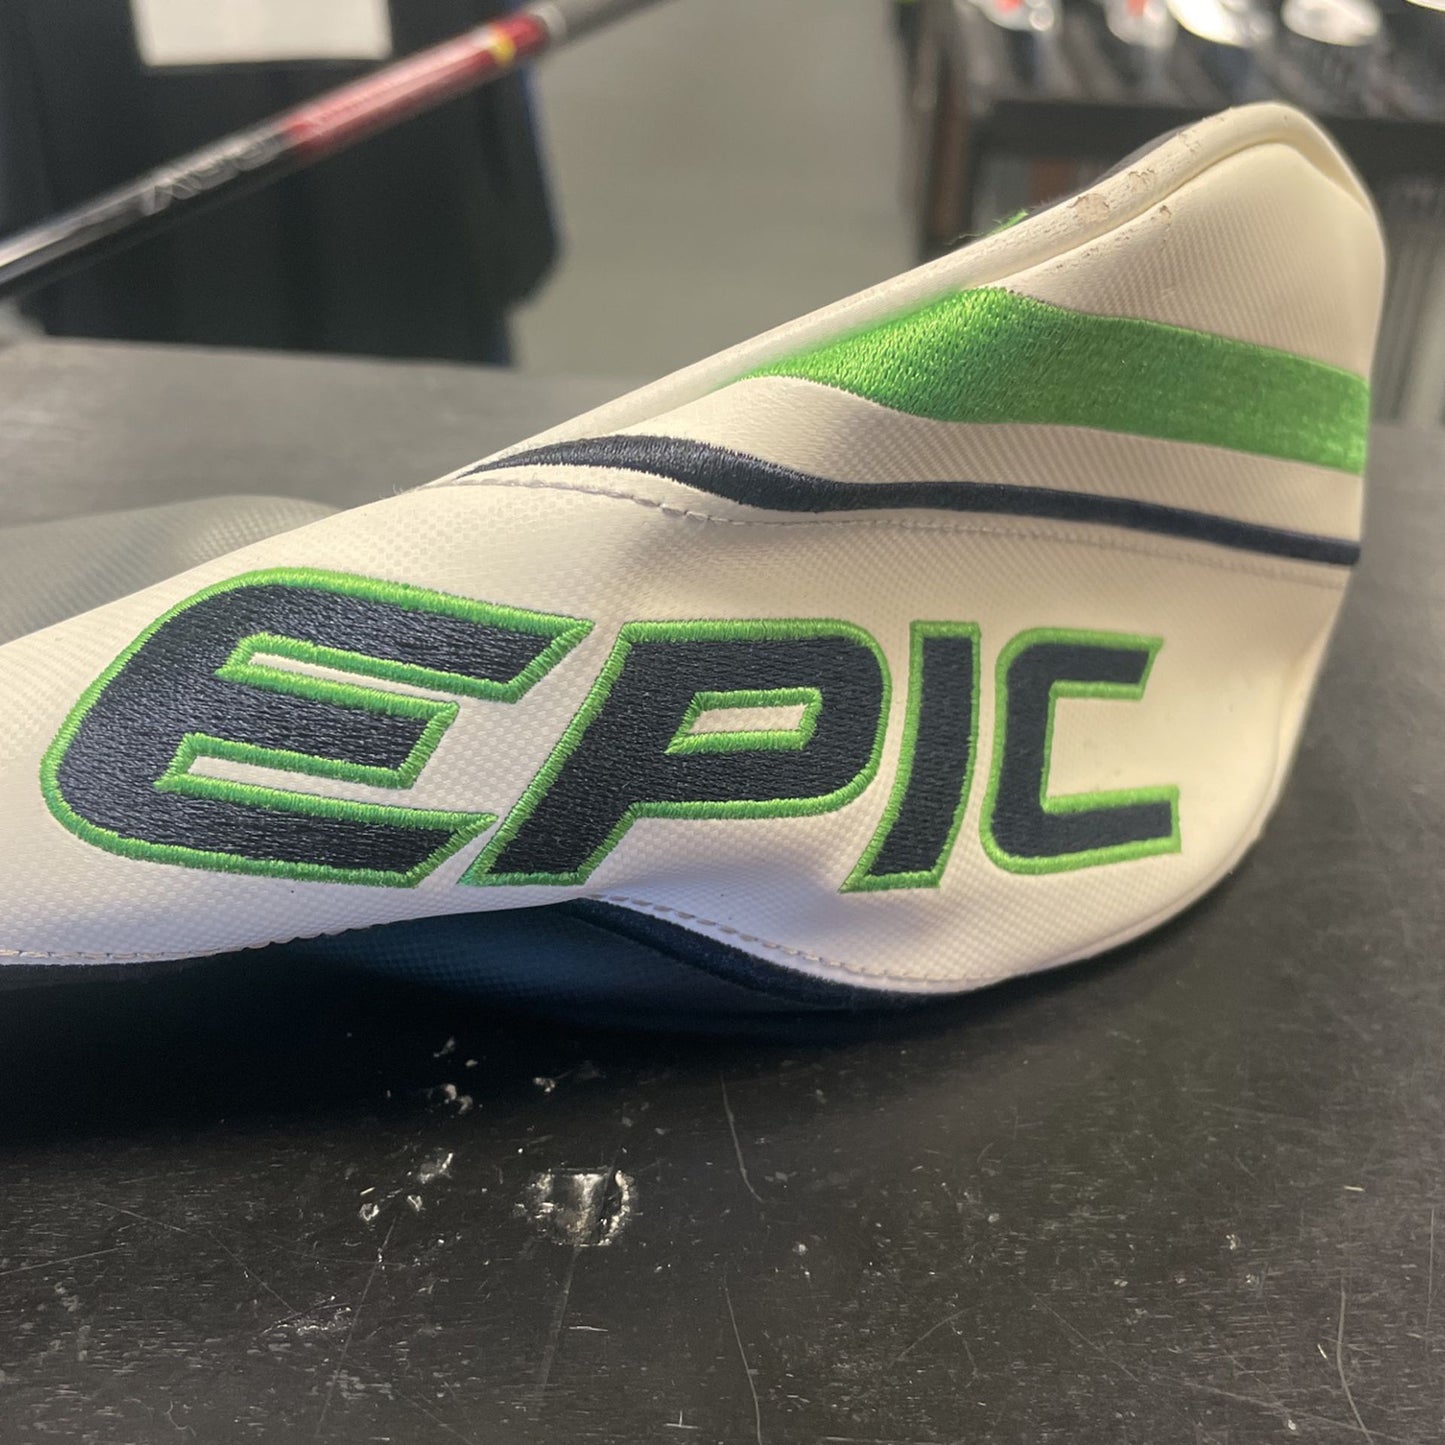 New-Callaway-Epic-Speed-4-fairway-wood-16.5-degree-right-hand-regular-flex-with-headcover